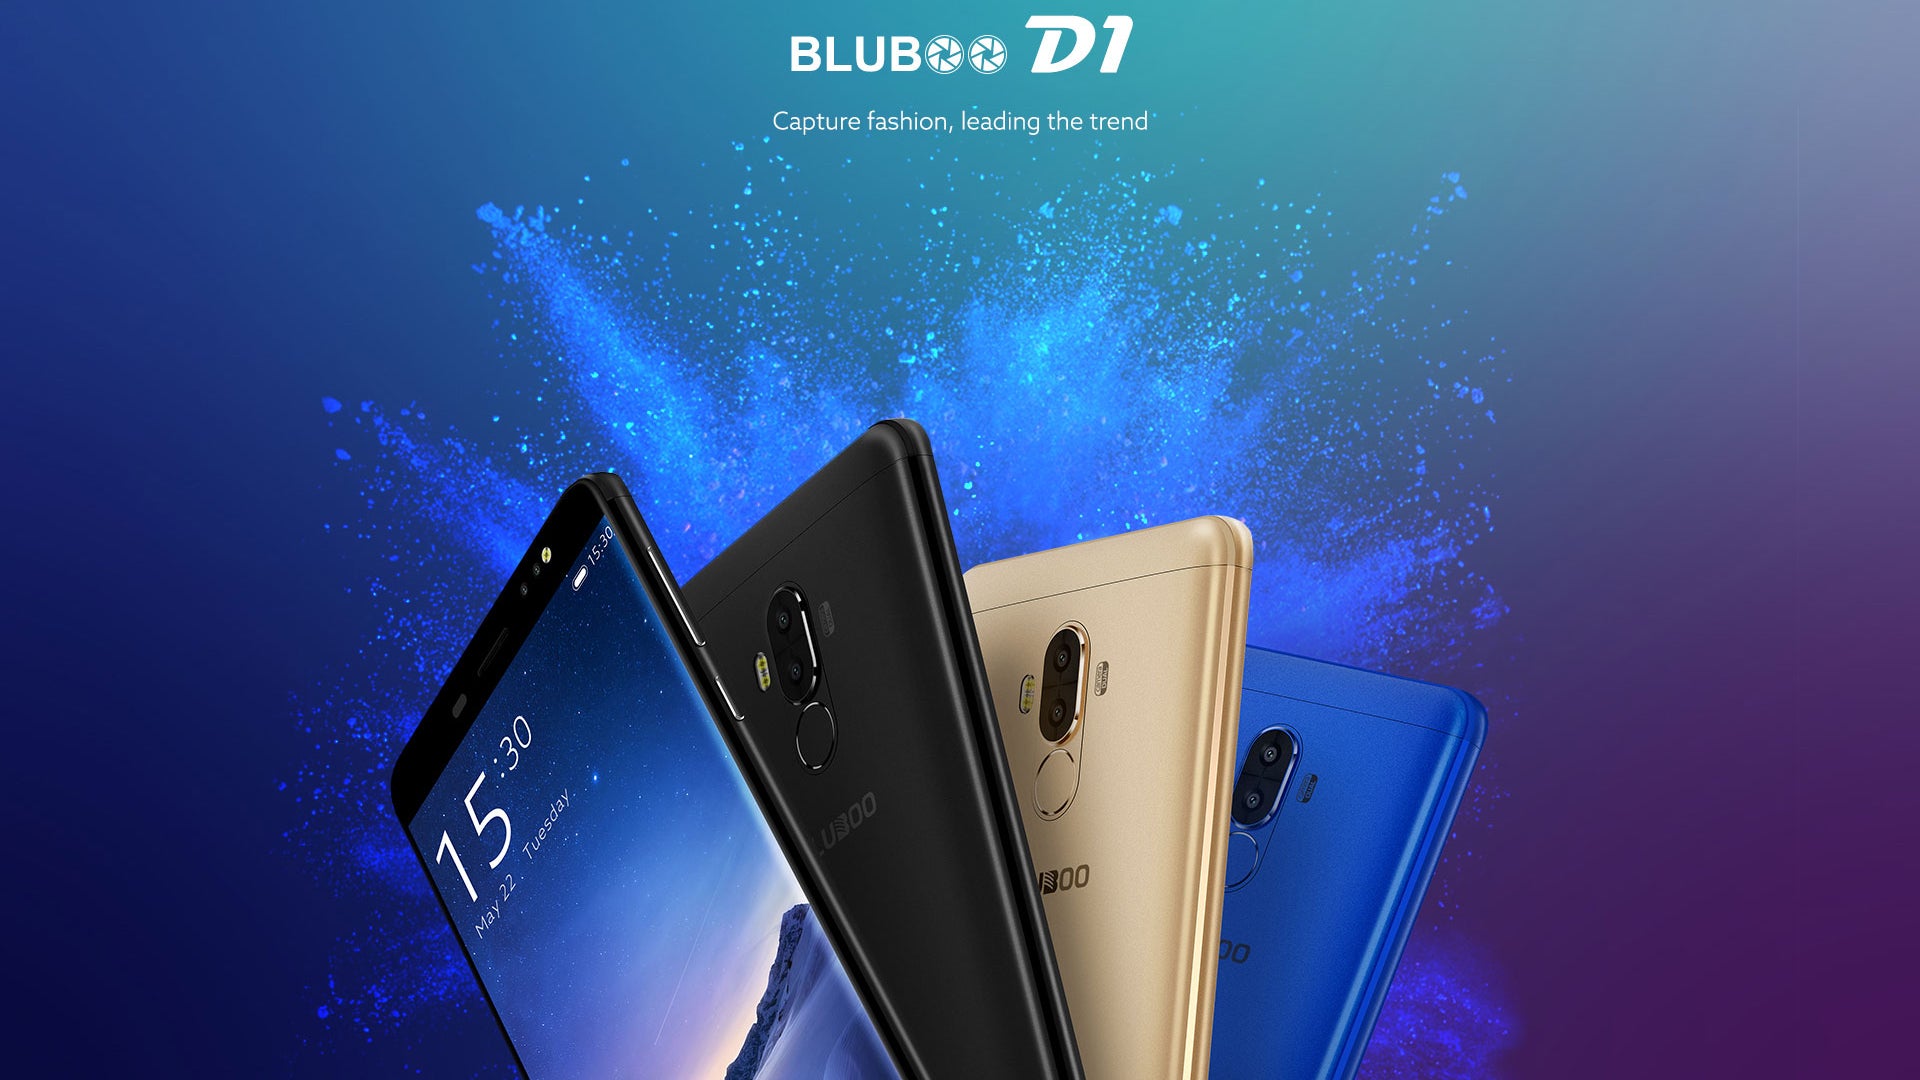 The Bluboo D1 is an affordable dual camera smartphone